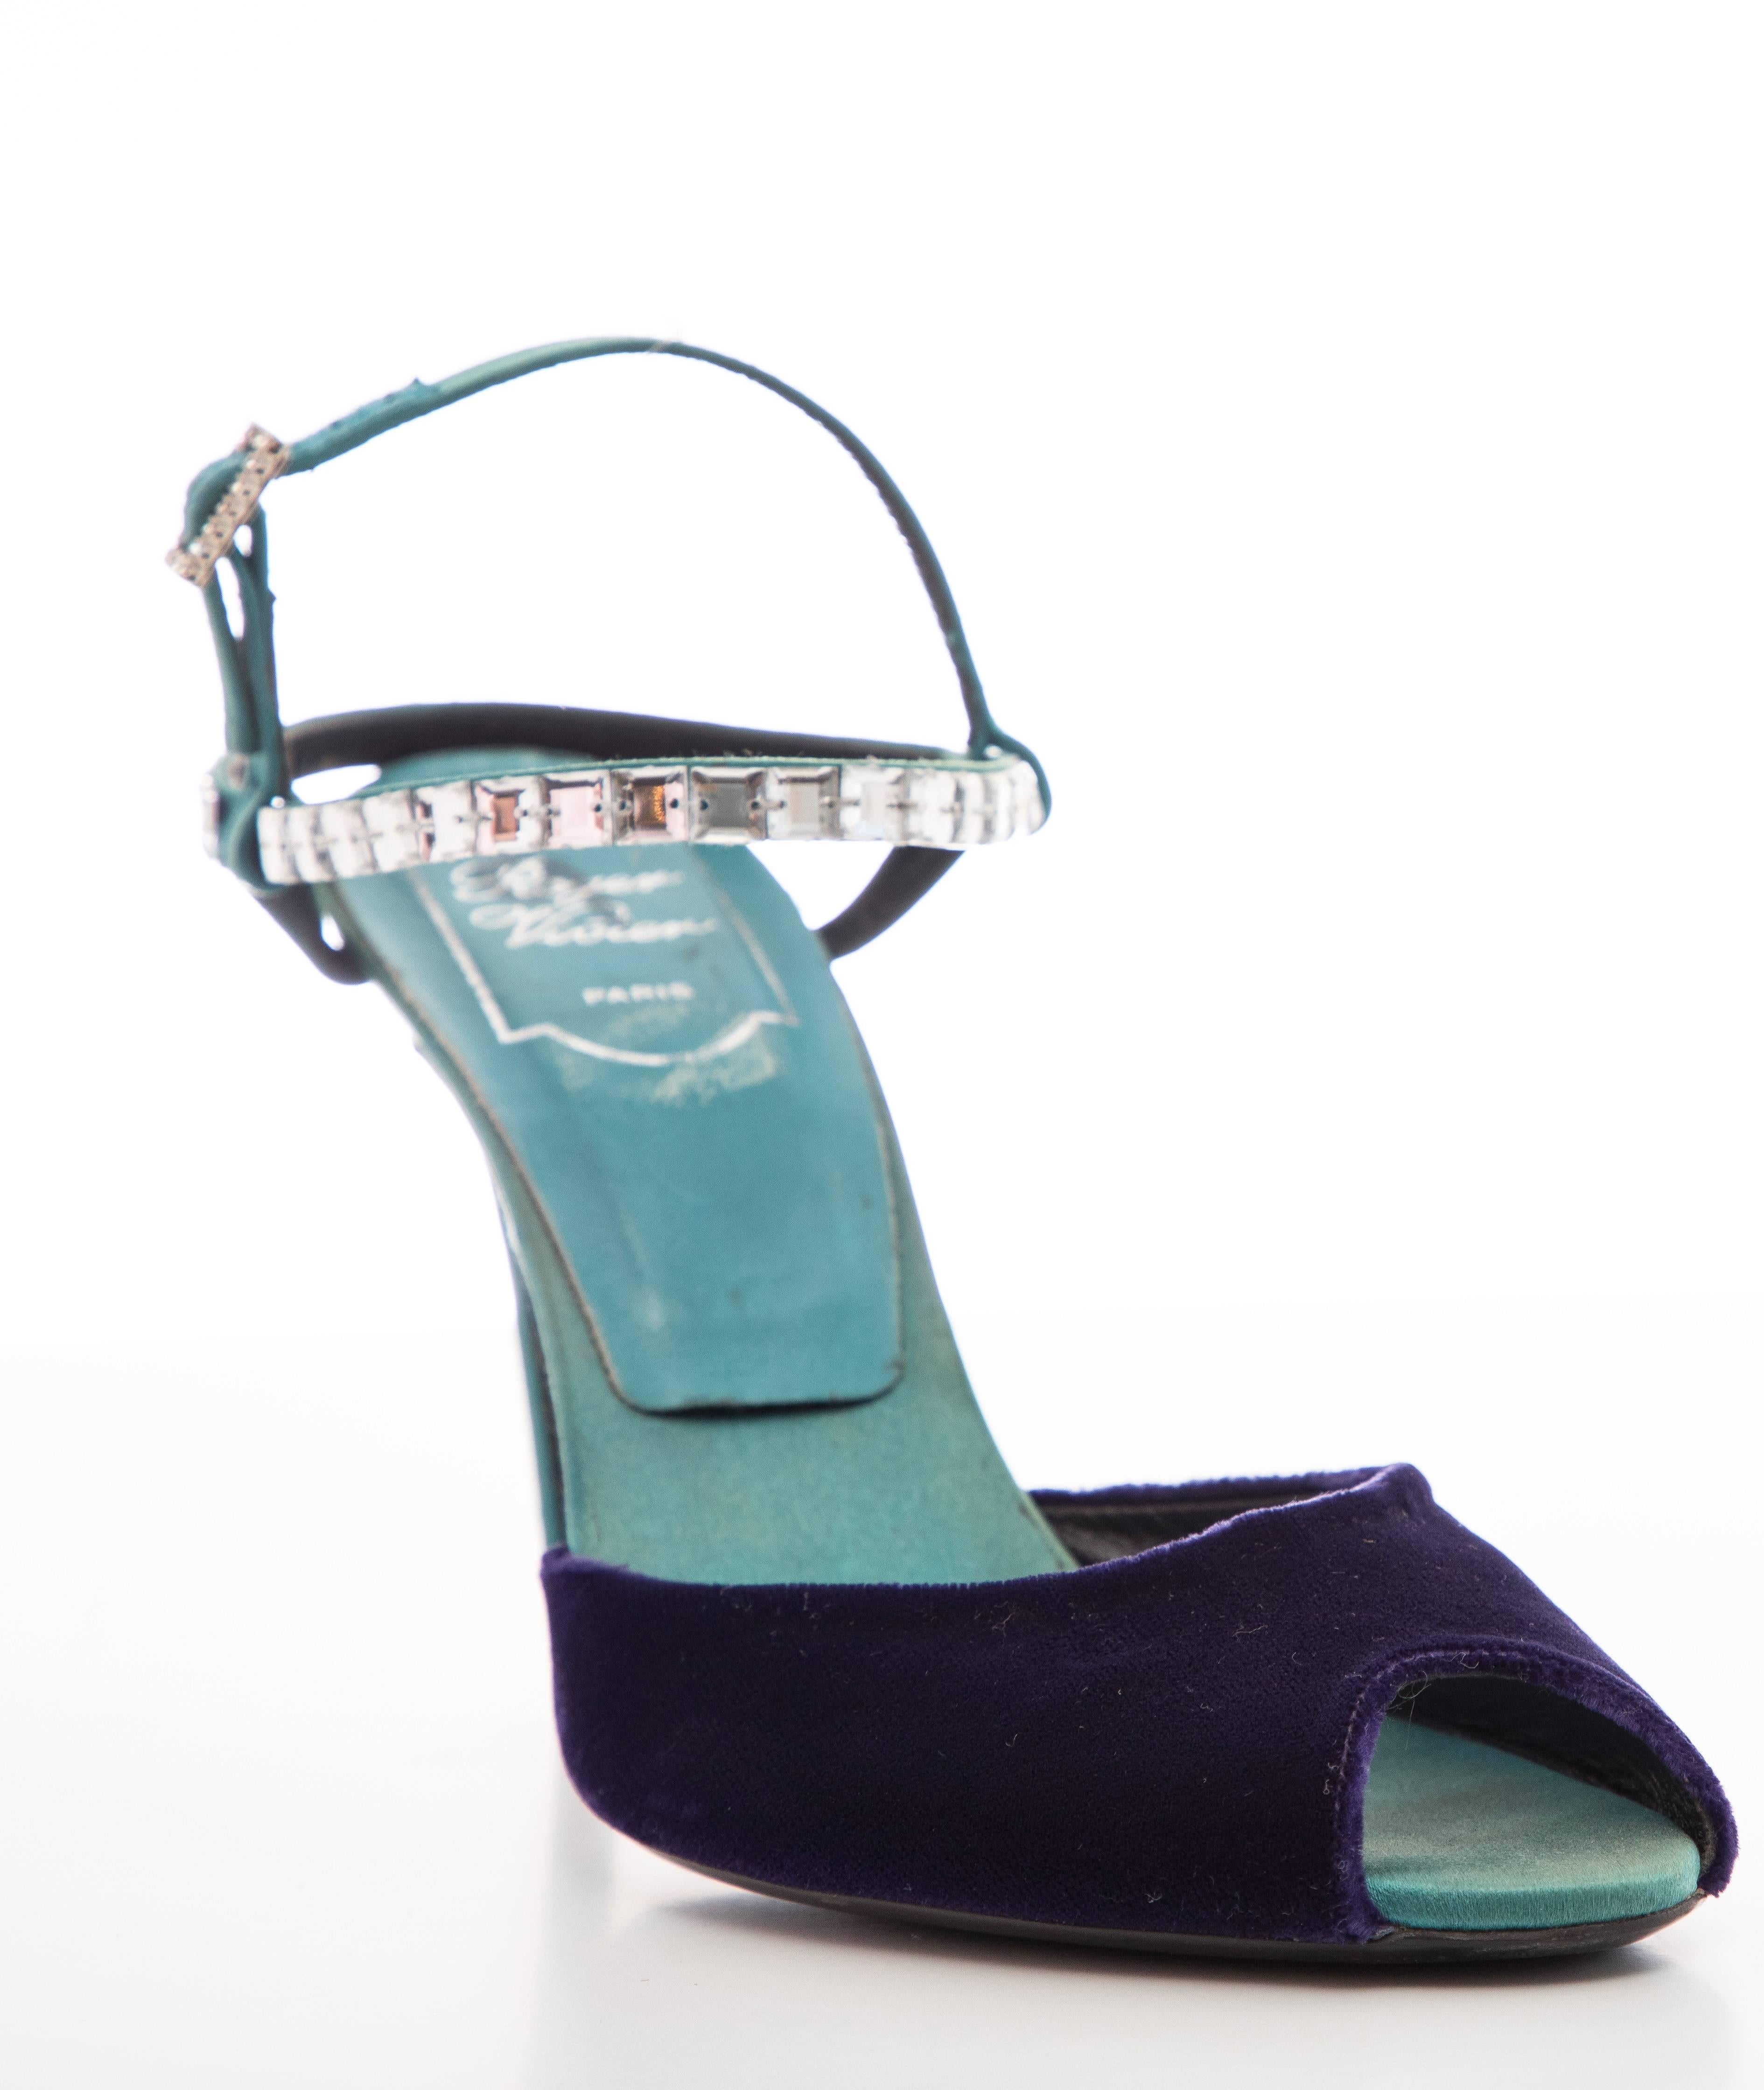 Roger Vivier Silk Satin Velvet Pumps With Beveled Square Crystal Ankle Straps In Good Condition For Sale In Cincinnati, OH